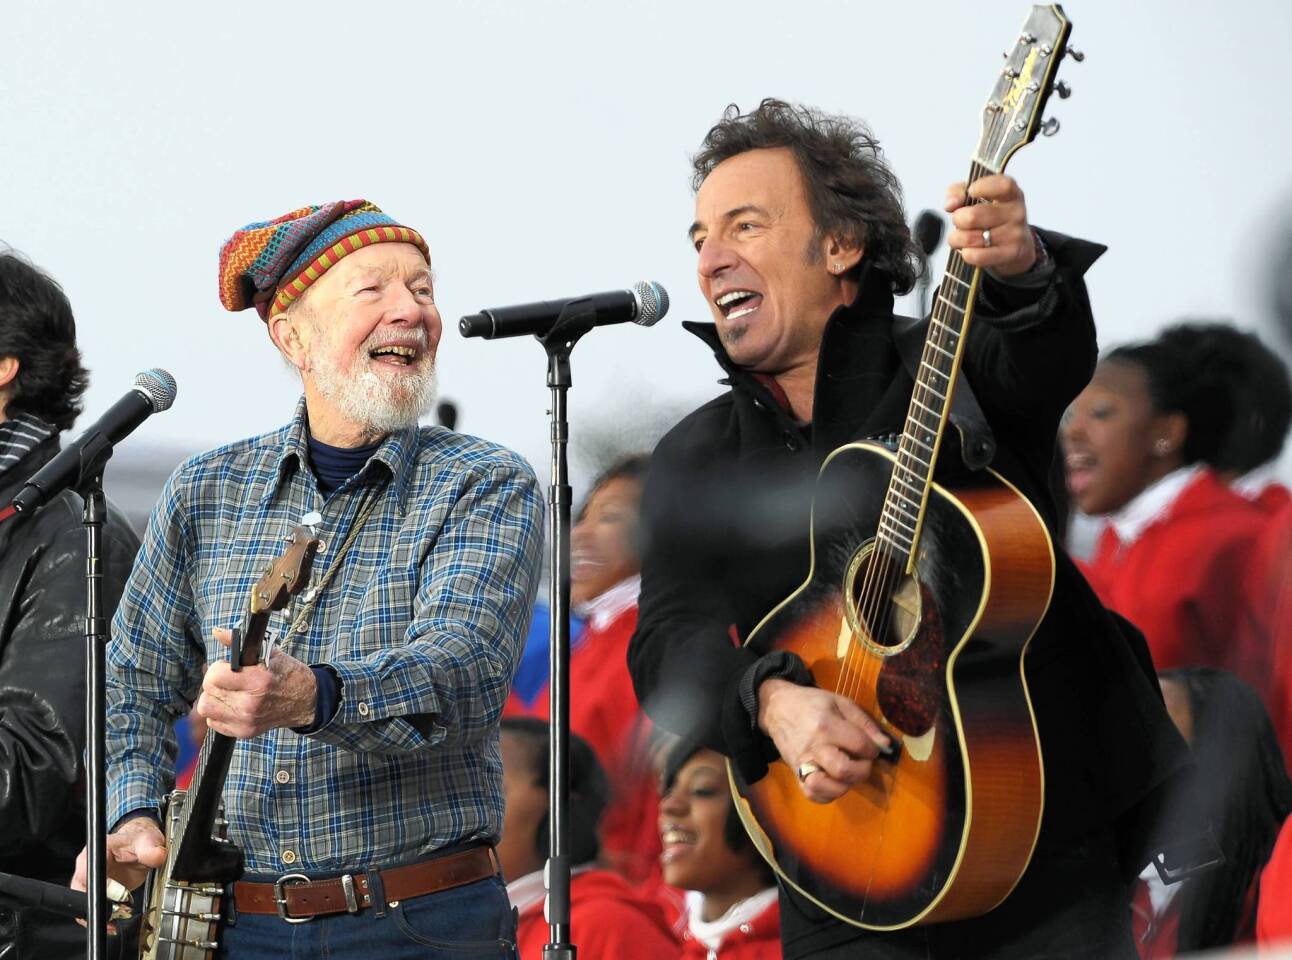 Pete Seeger, left, and Bruce Springsteen perform at the We are One Inaugural Celebration at the Lincoln Memorial on January 18, 2009 in Washington, DC.